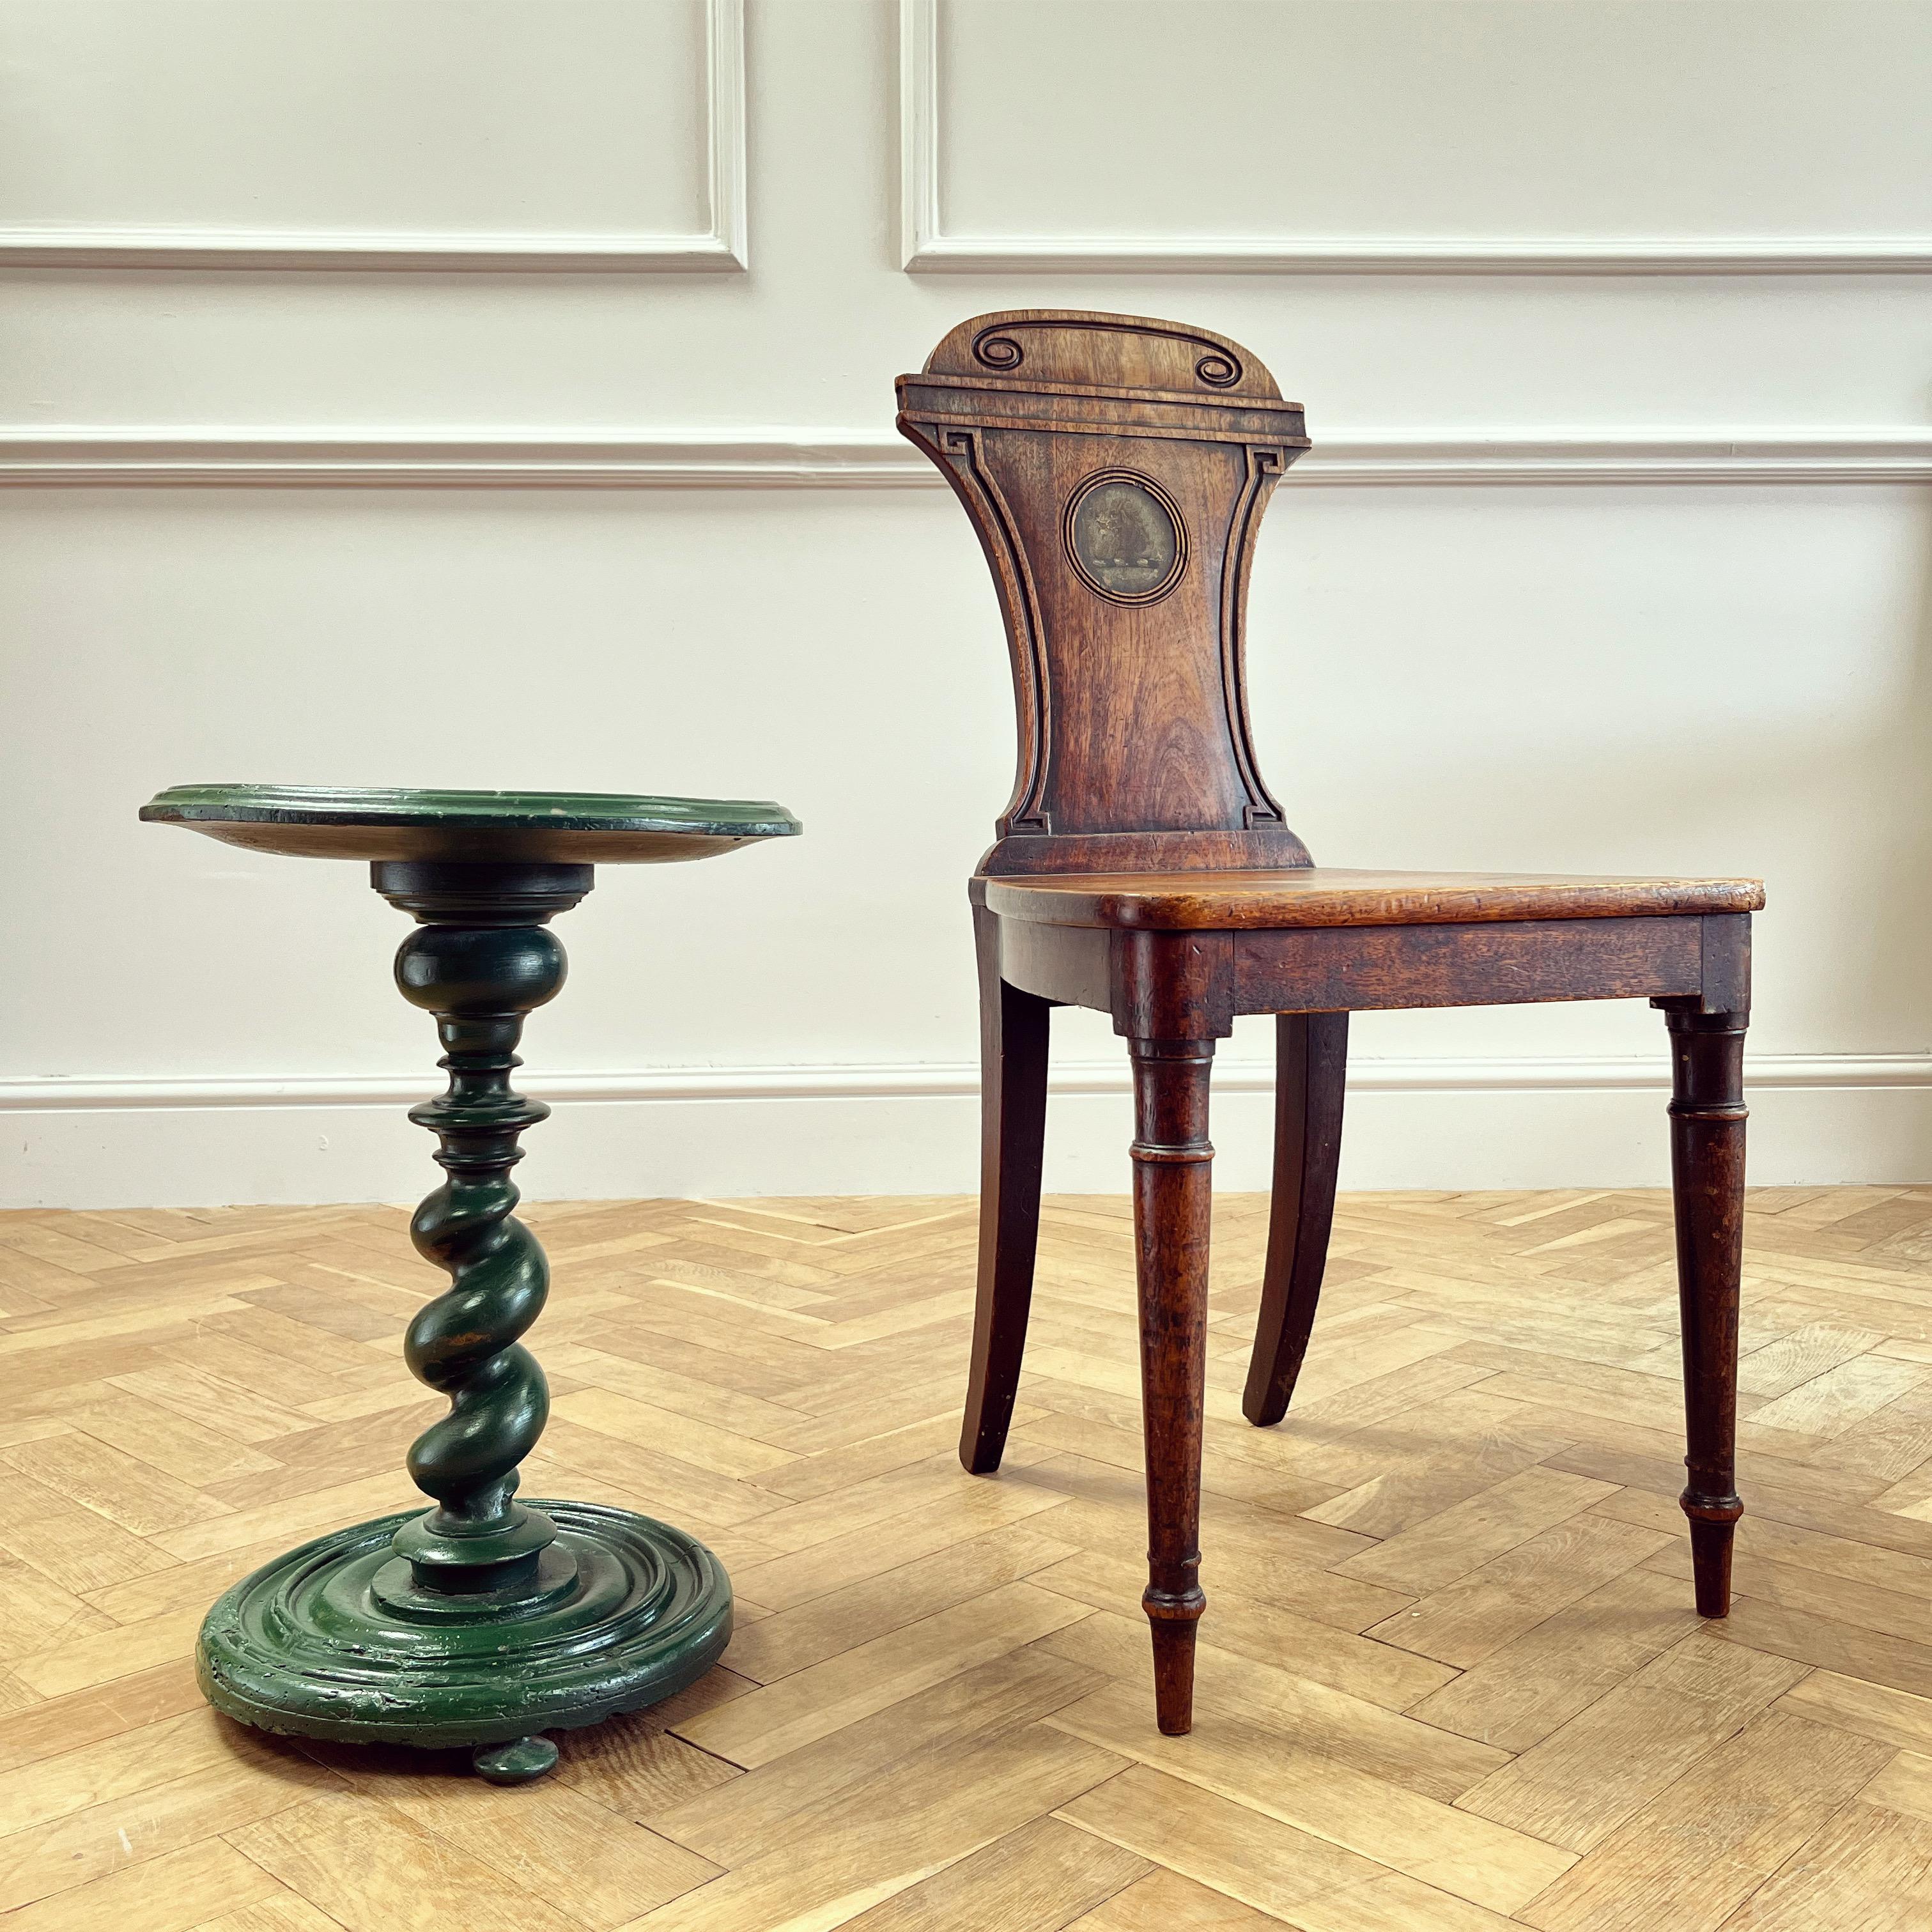 An occasional table with turned ciruclar top on single Solomonic column support and turned base with three bun feet - painted in a striking green gloss some time ago. Possibly yew wood.

English, Seventeen Century

H 48.5 x W 35.5 x D 35.5 cms

